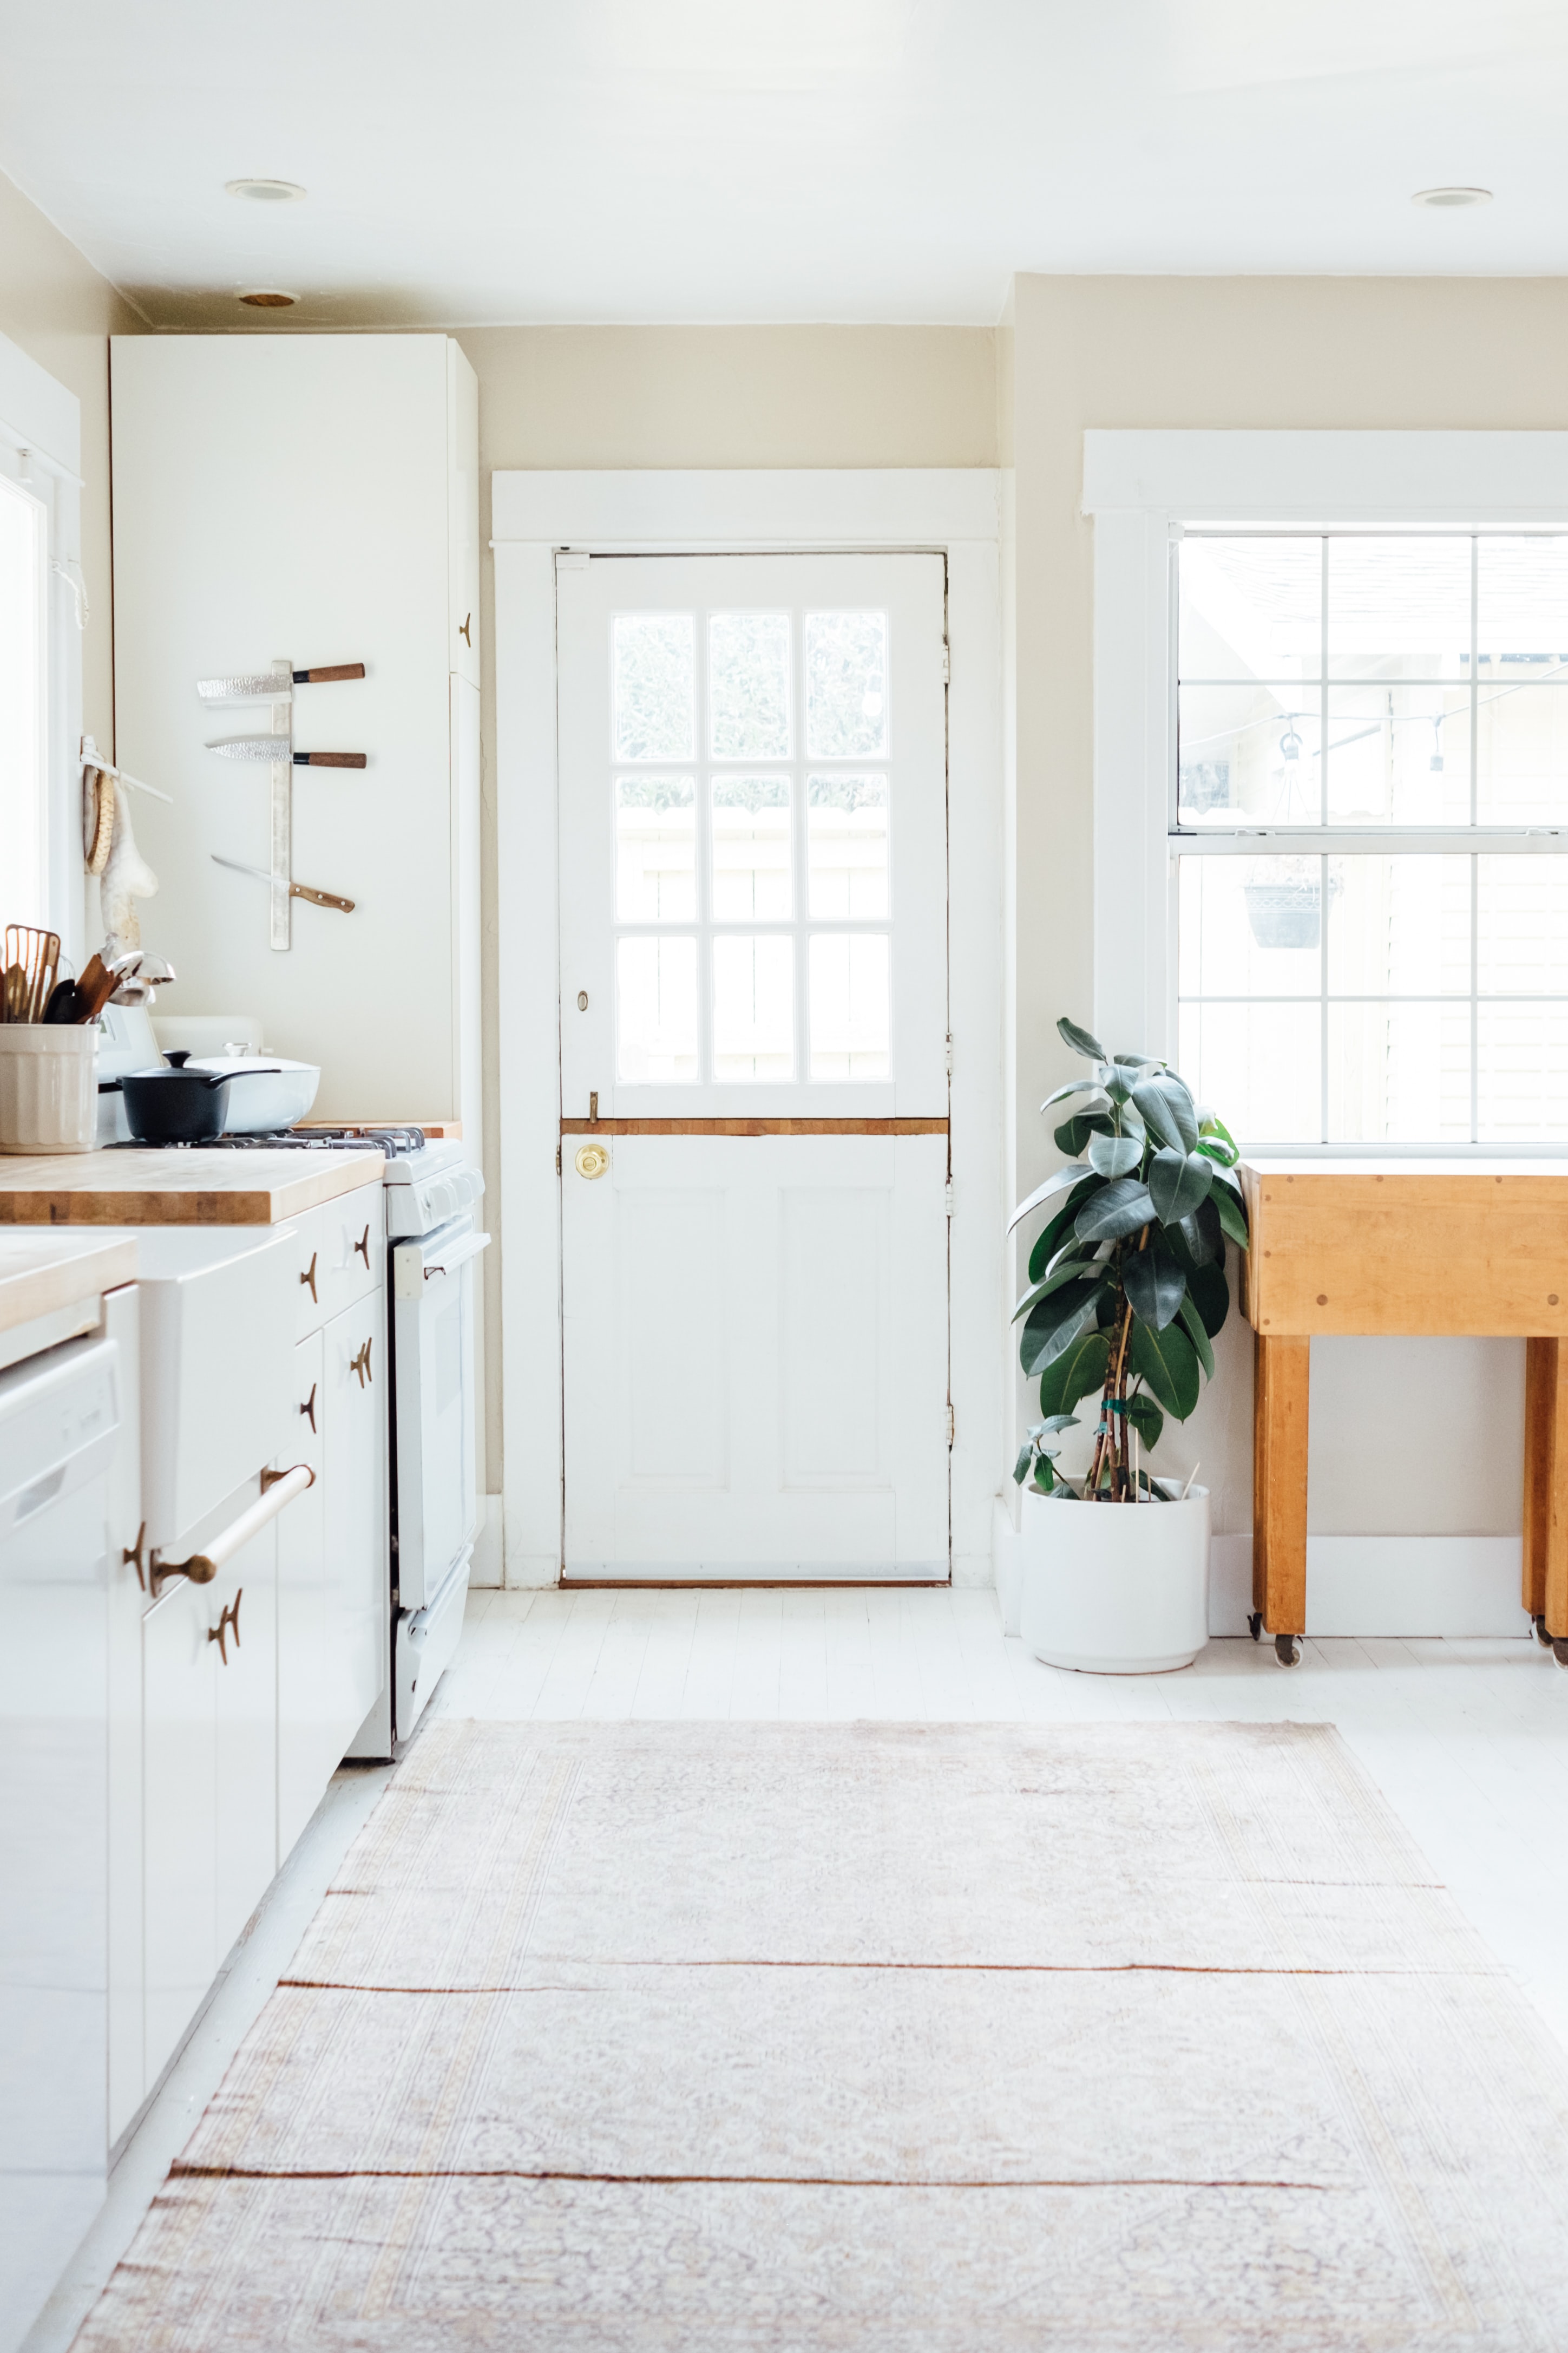 Customized rugs for the kitchen: how to choose the right one